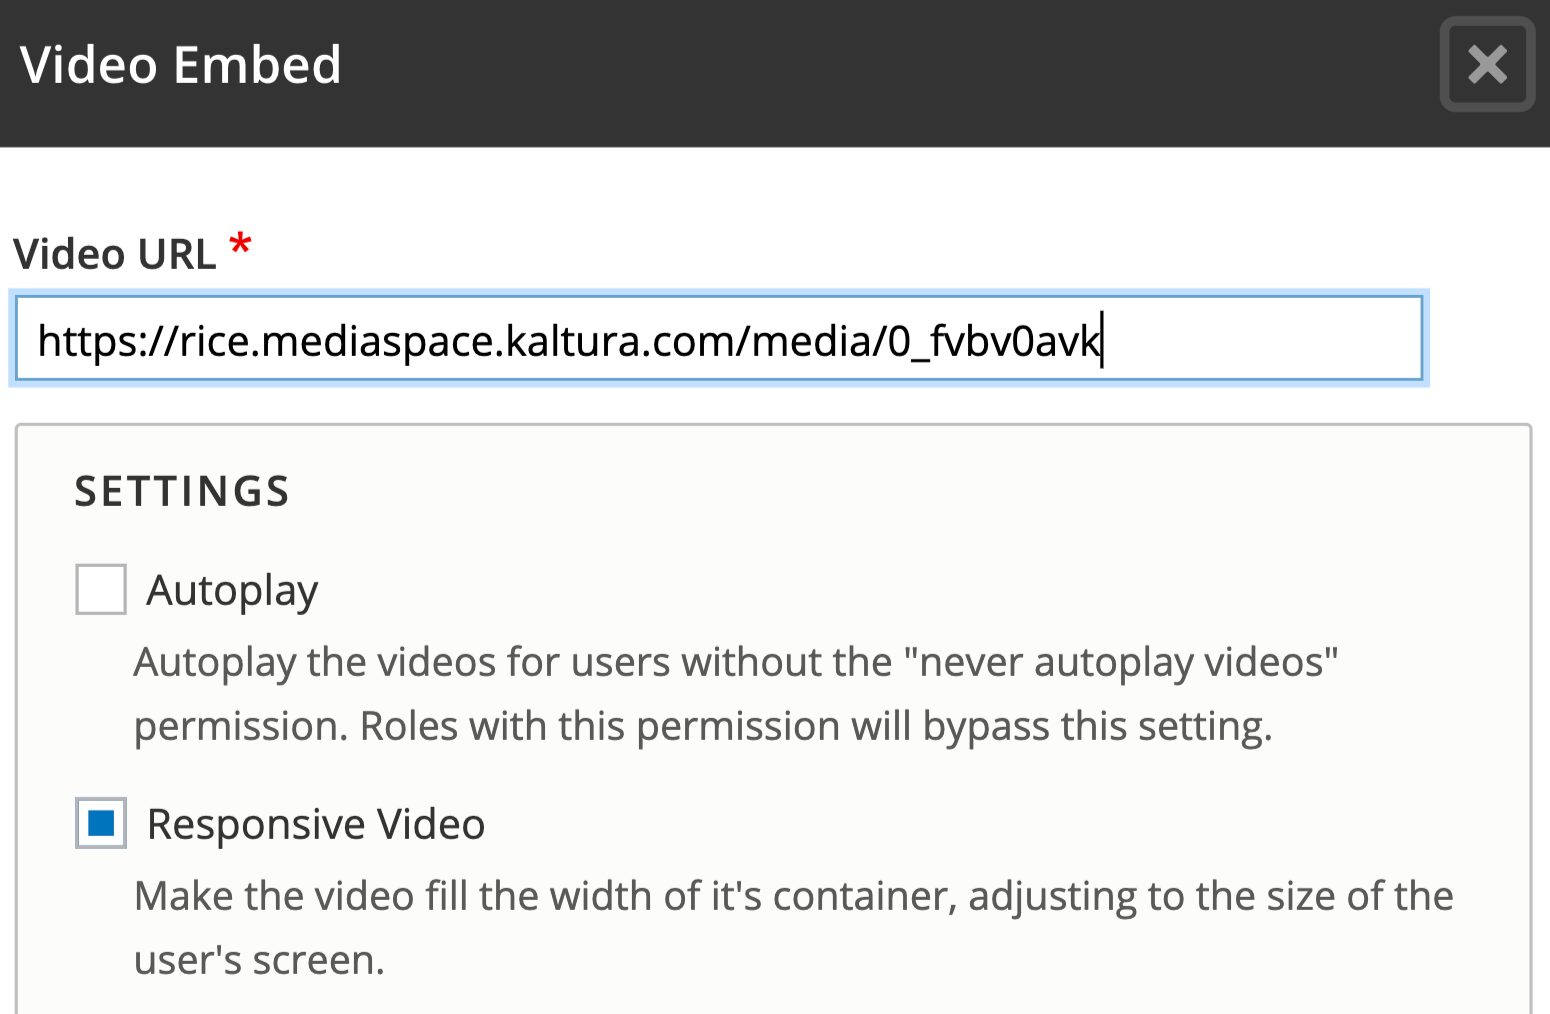 Video Embed modal with Video URL field and Settings.